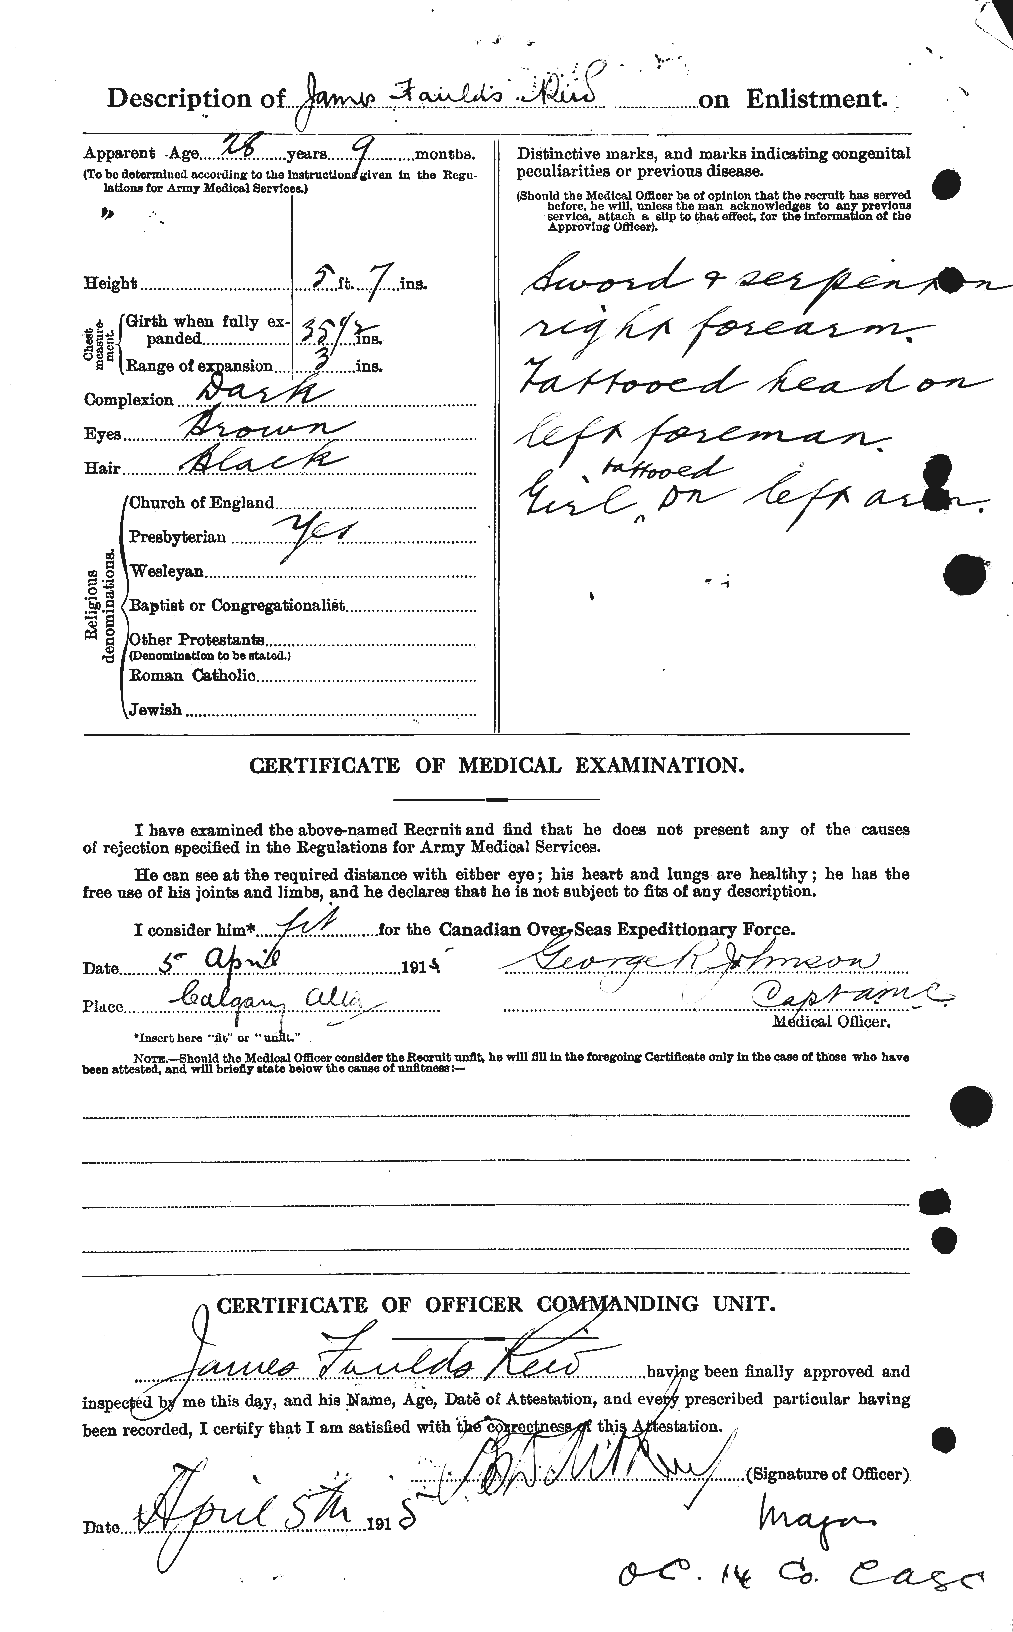 Personnel Records of the First World War - CEF 598709b